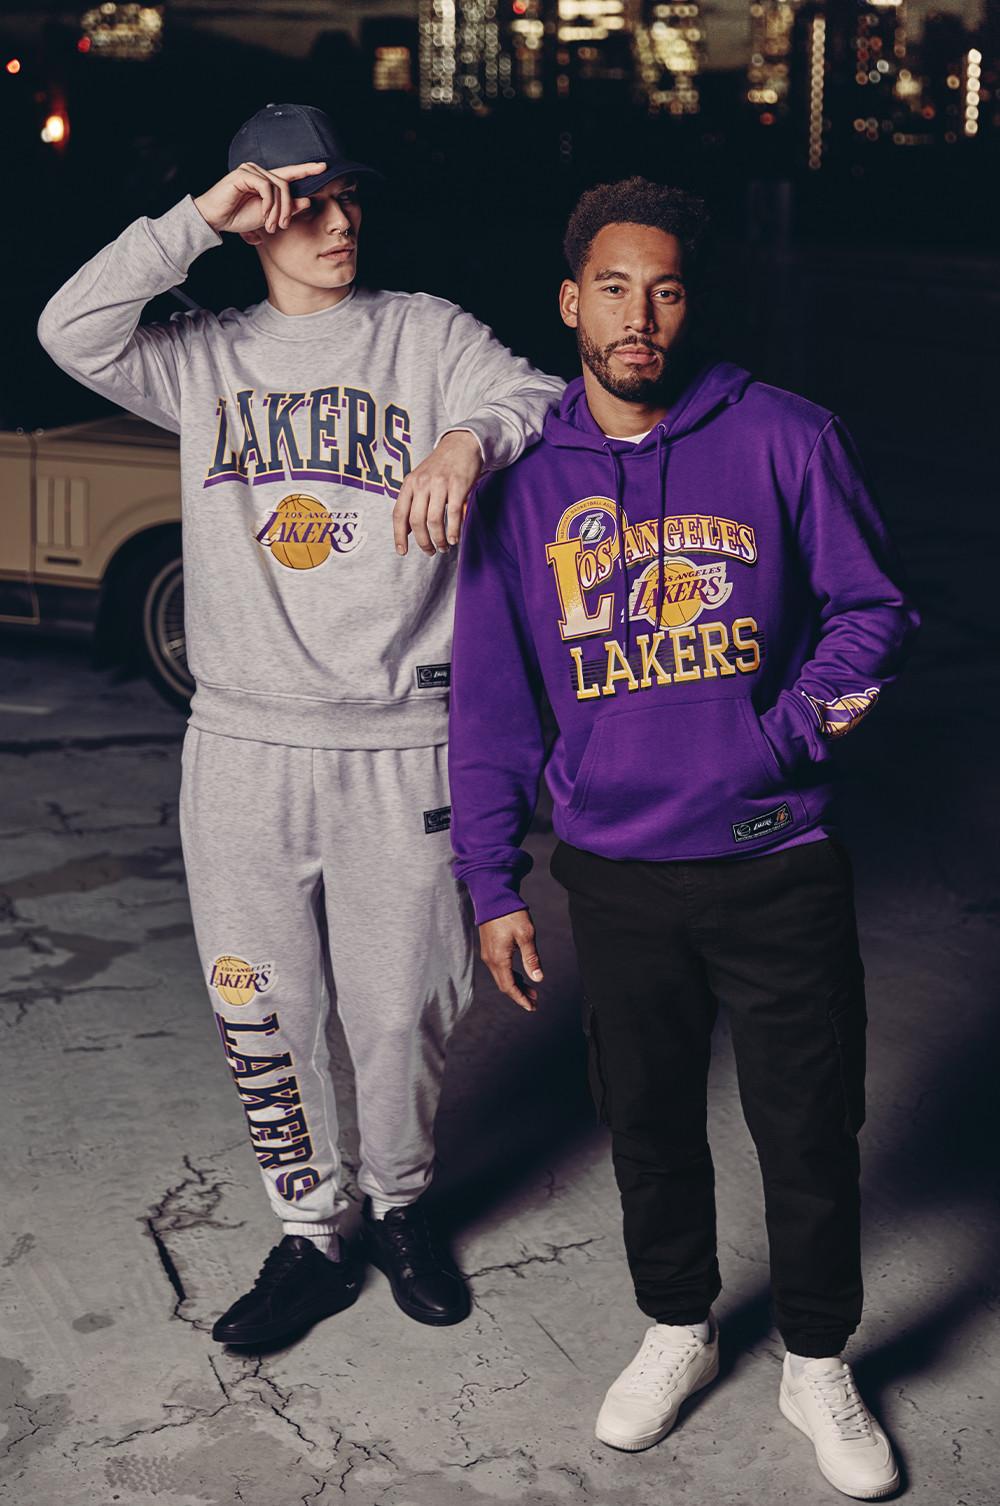 Primark's Newest Collection with NBA | Primark